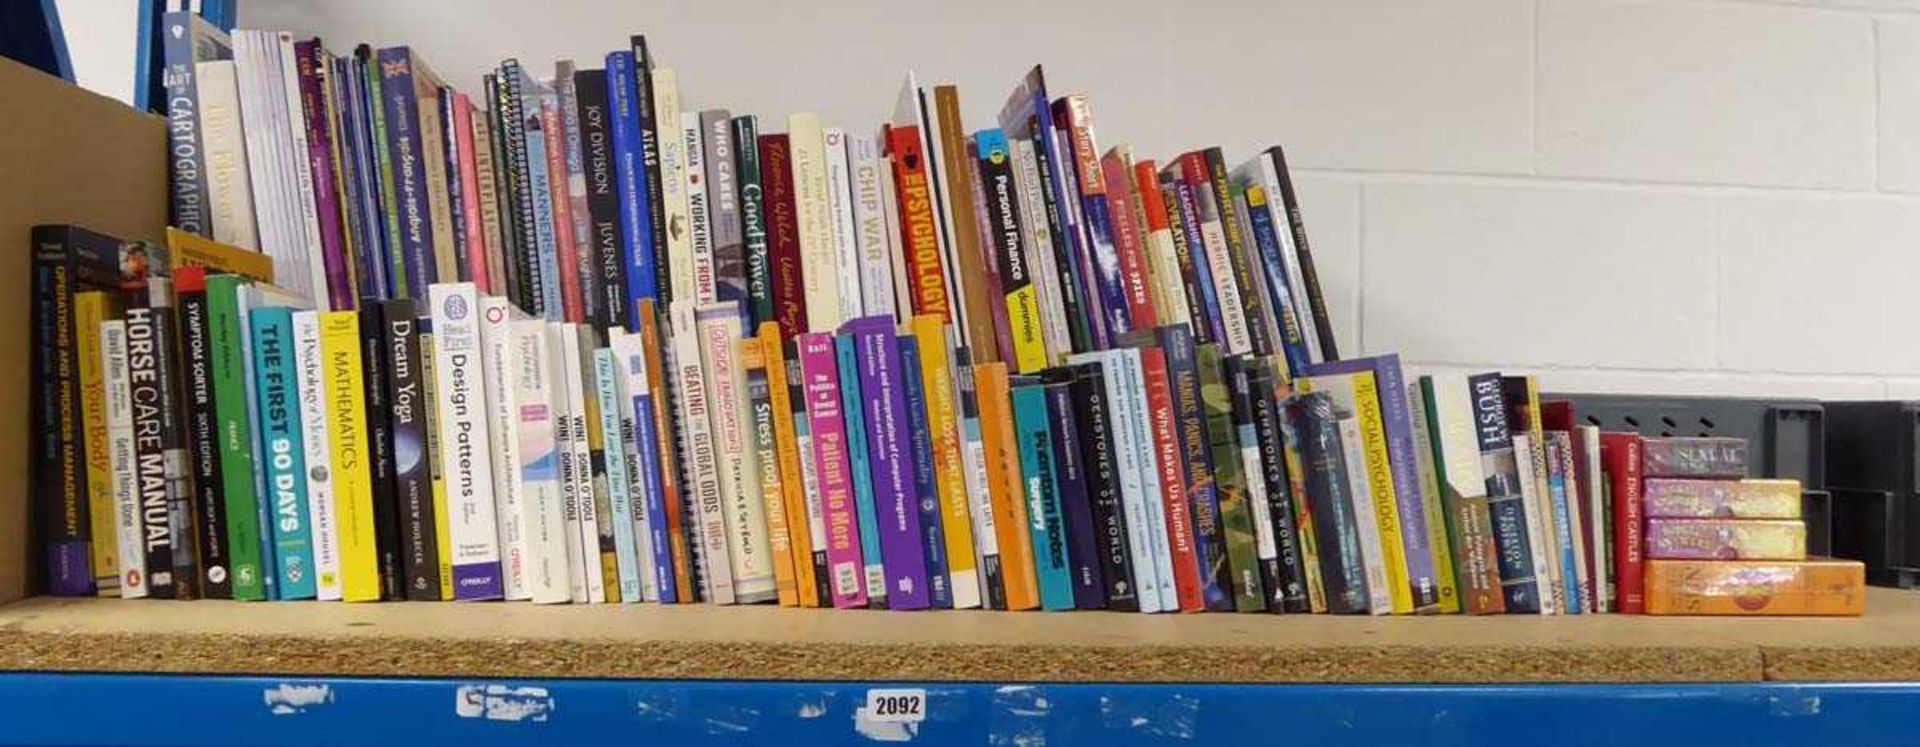 Part of shelf of reference books